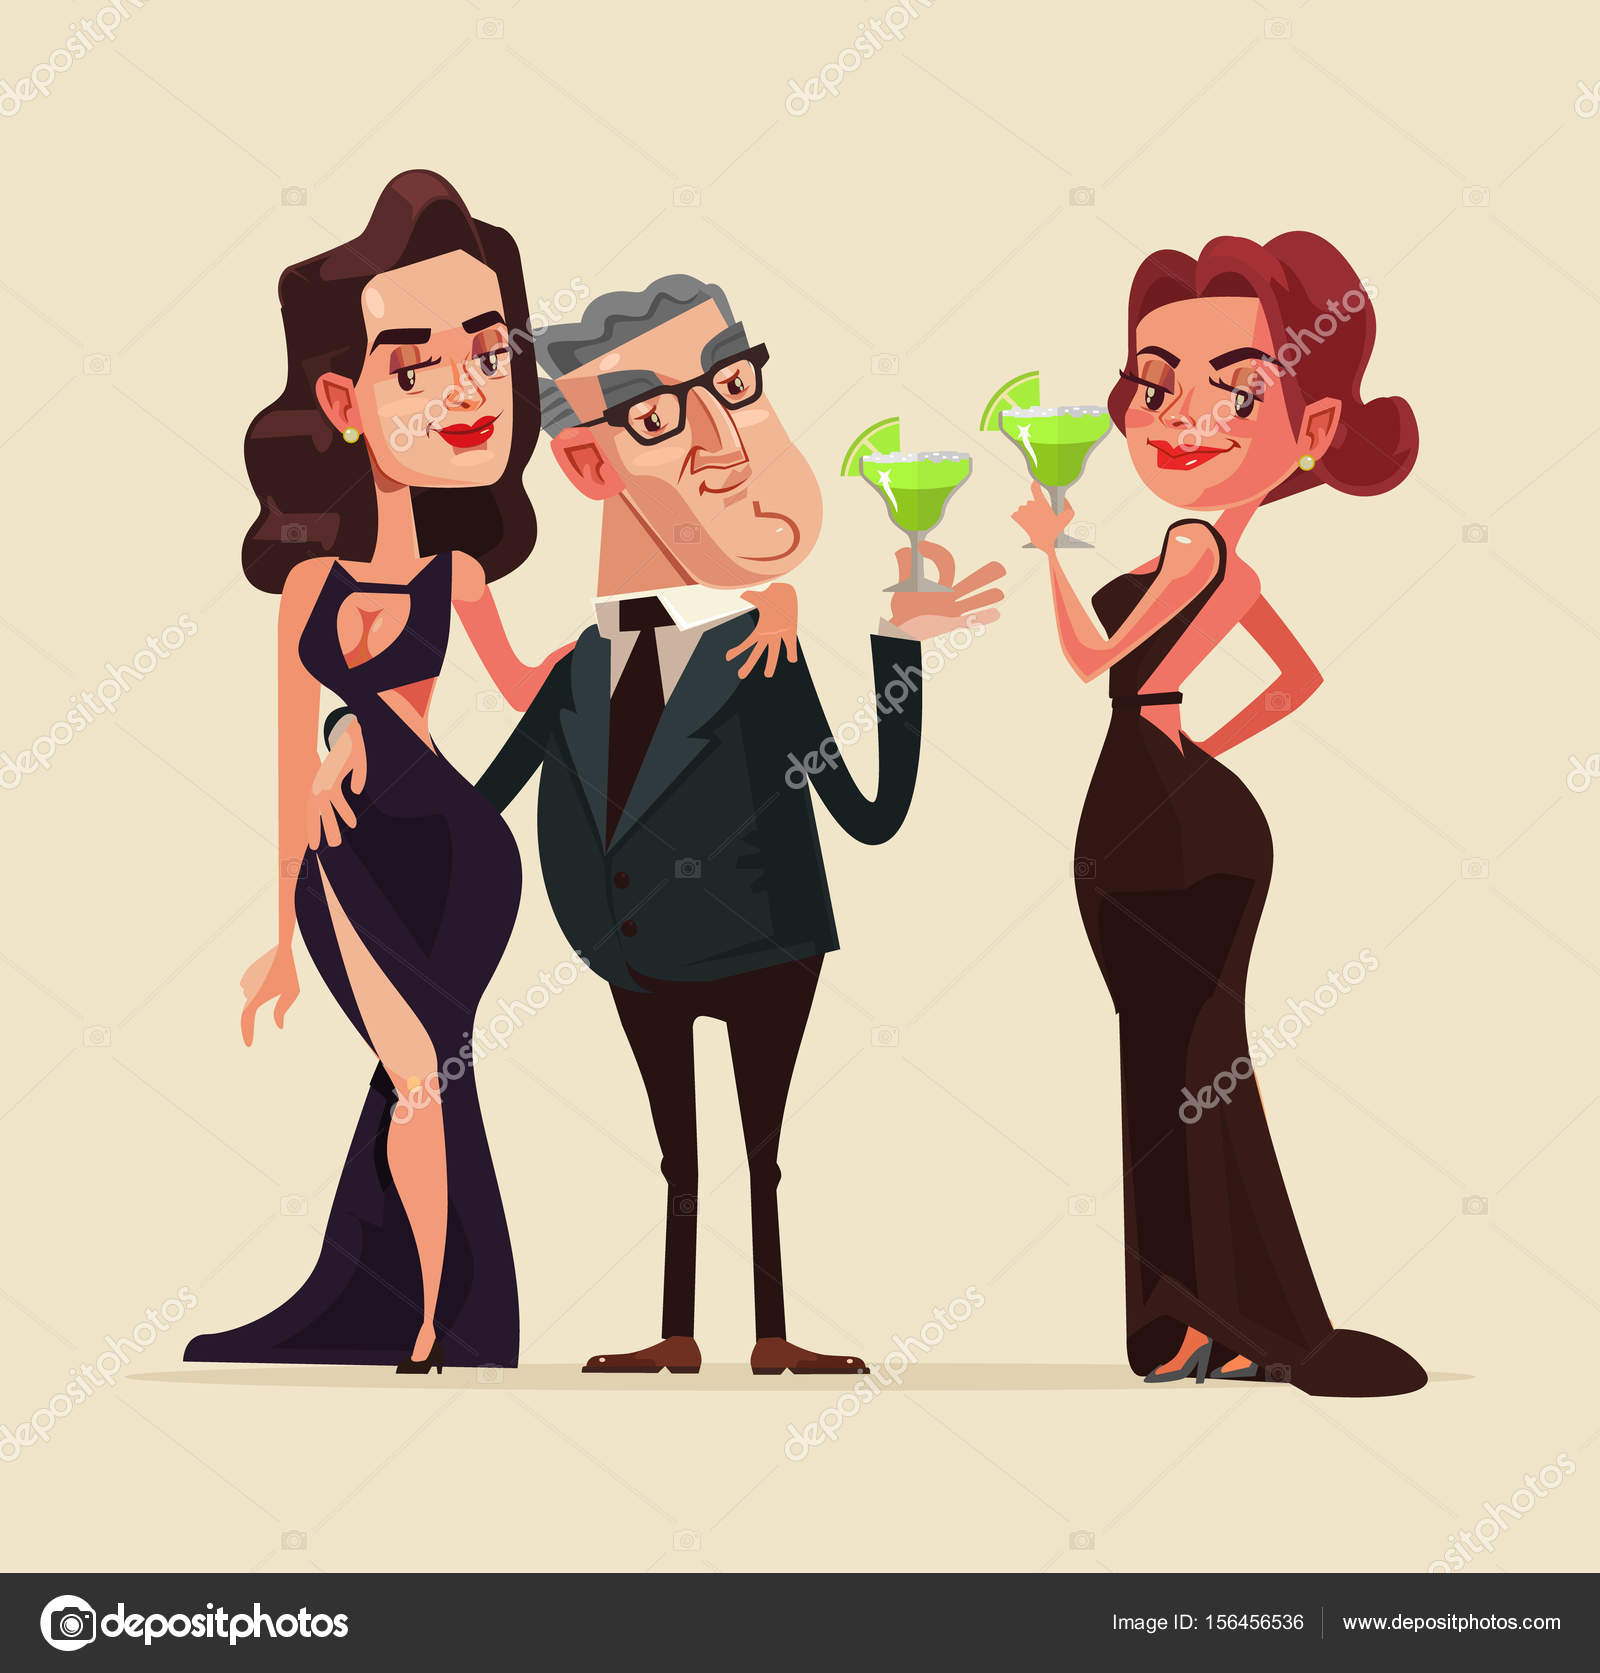 404 Rich Women Cartoon Vector Images Free Royalty Free Rich Women Cartoon Vectors Depositphotos